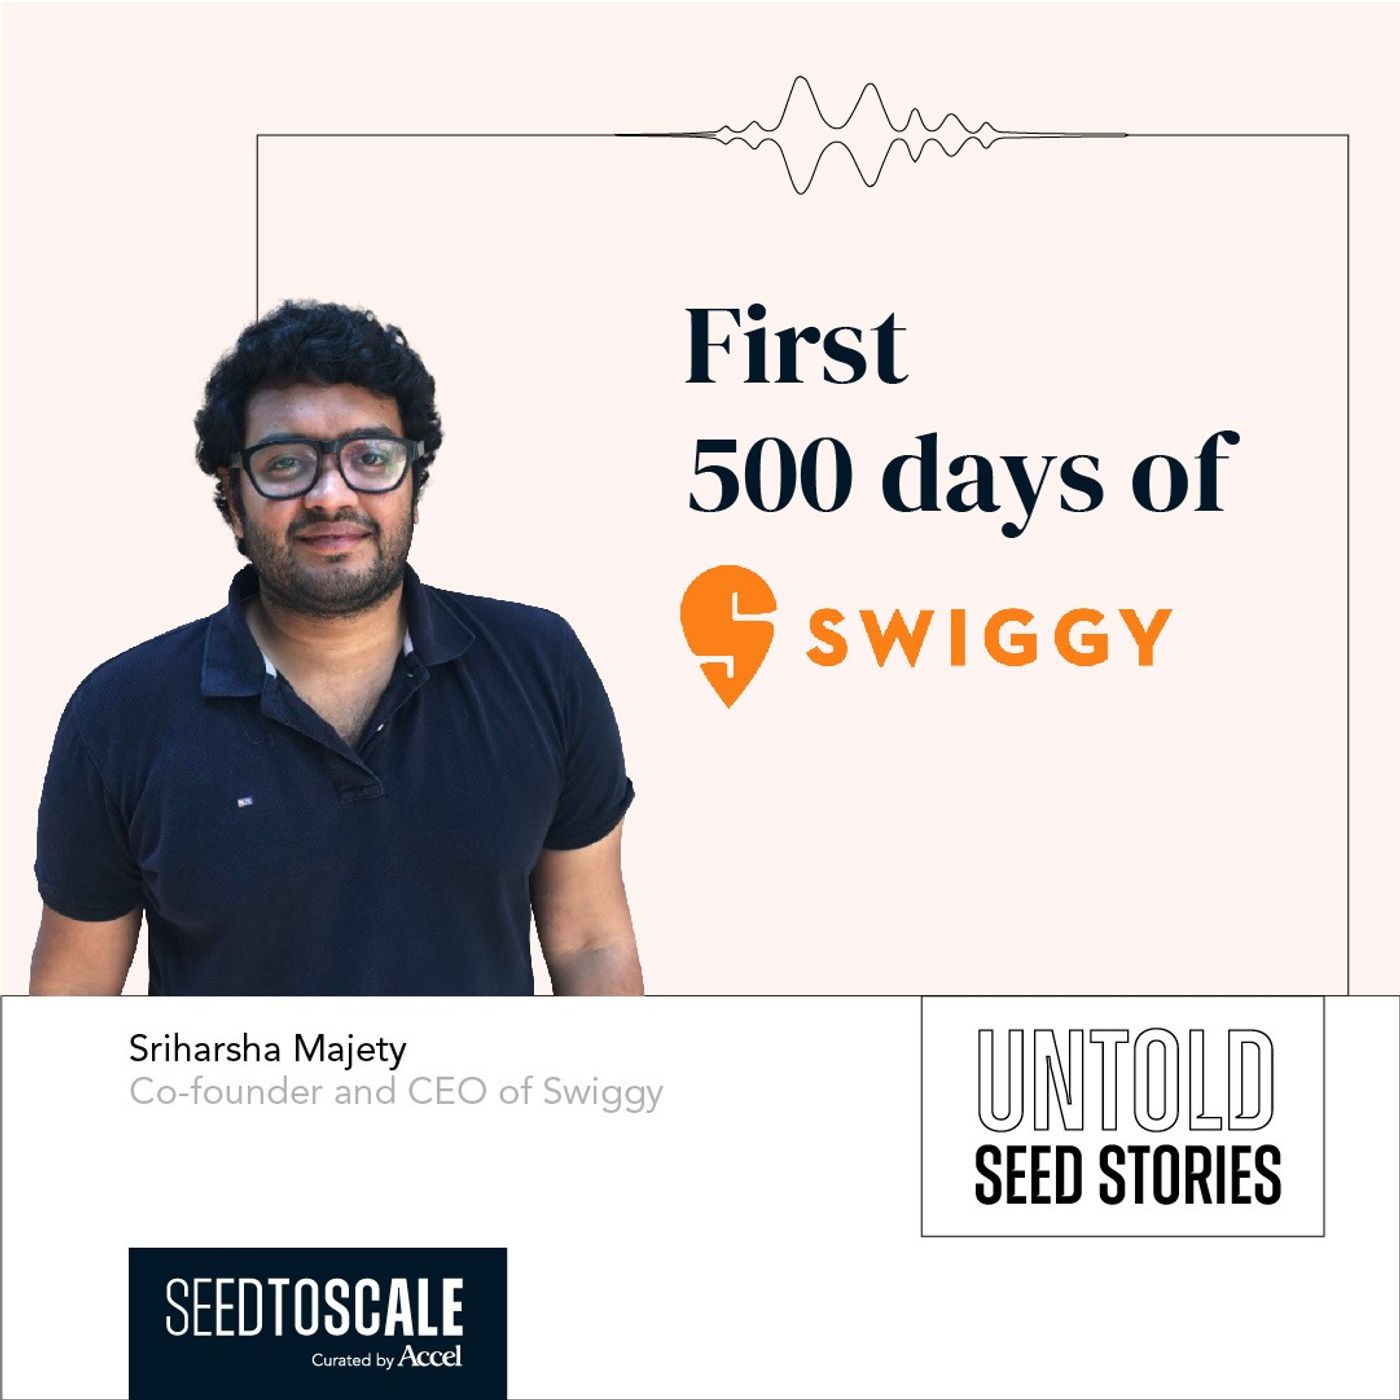 INSIGHTS #61 – Untold Seed Stories: First 500 Days of Swiggy